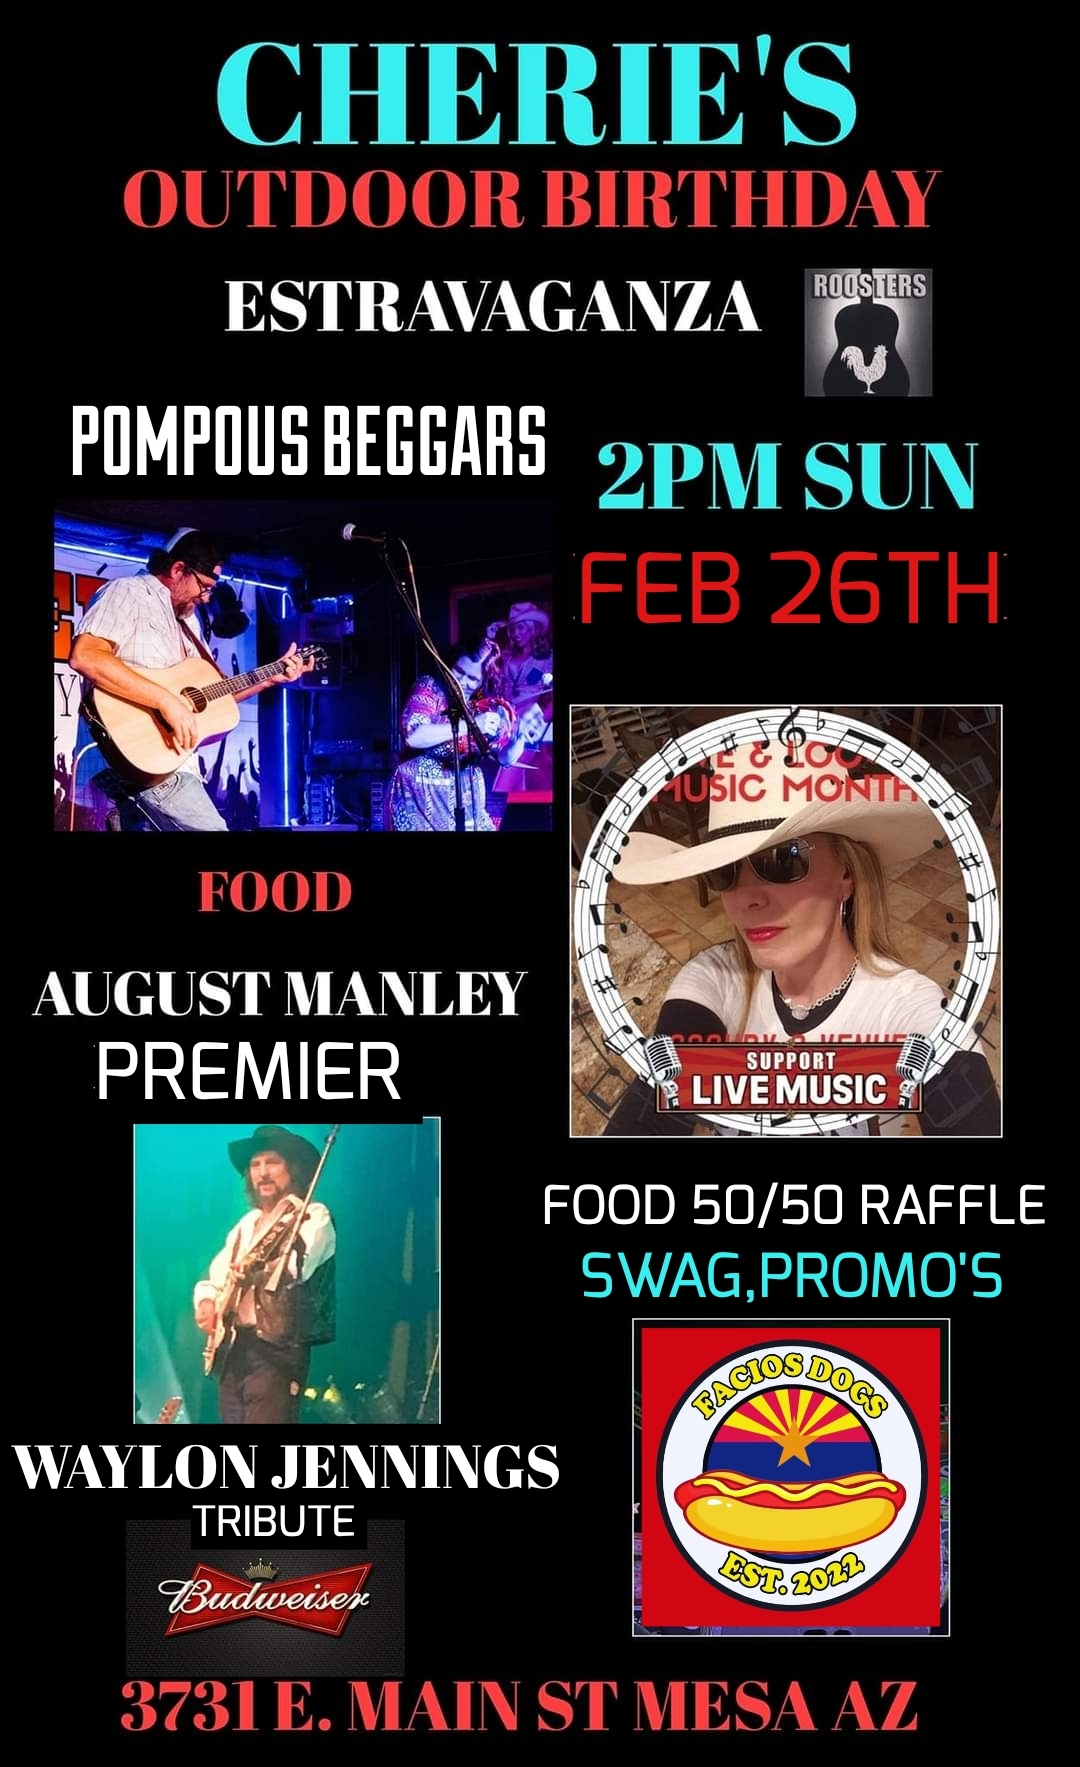 Cherie’s 8th Annual Birthday Party with August Manley Full Band Outdoor Show (Waylon Jennings Tribute)